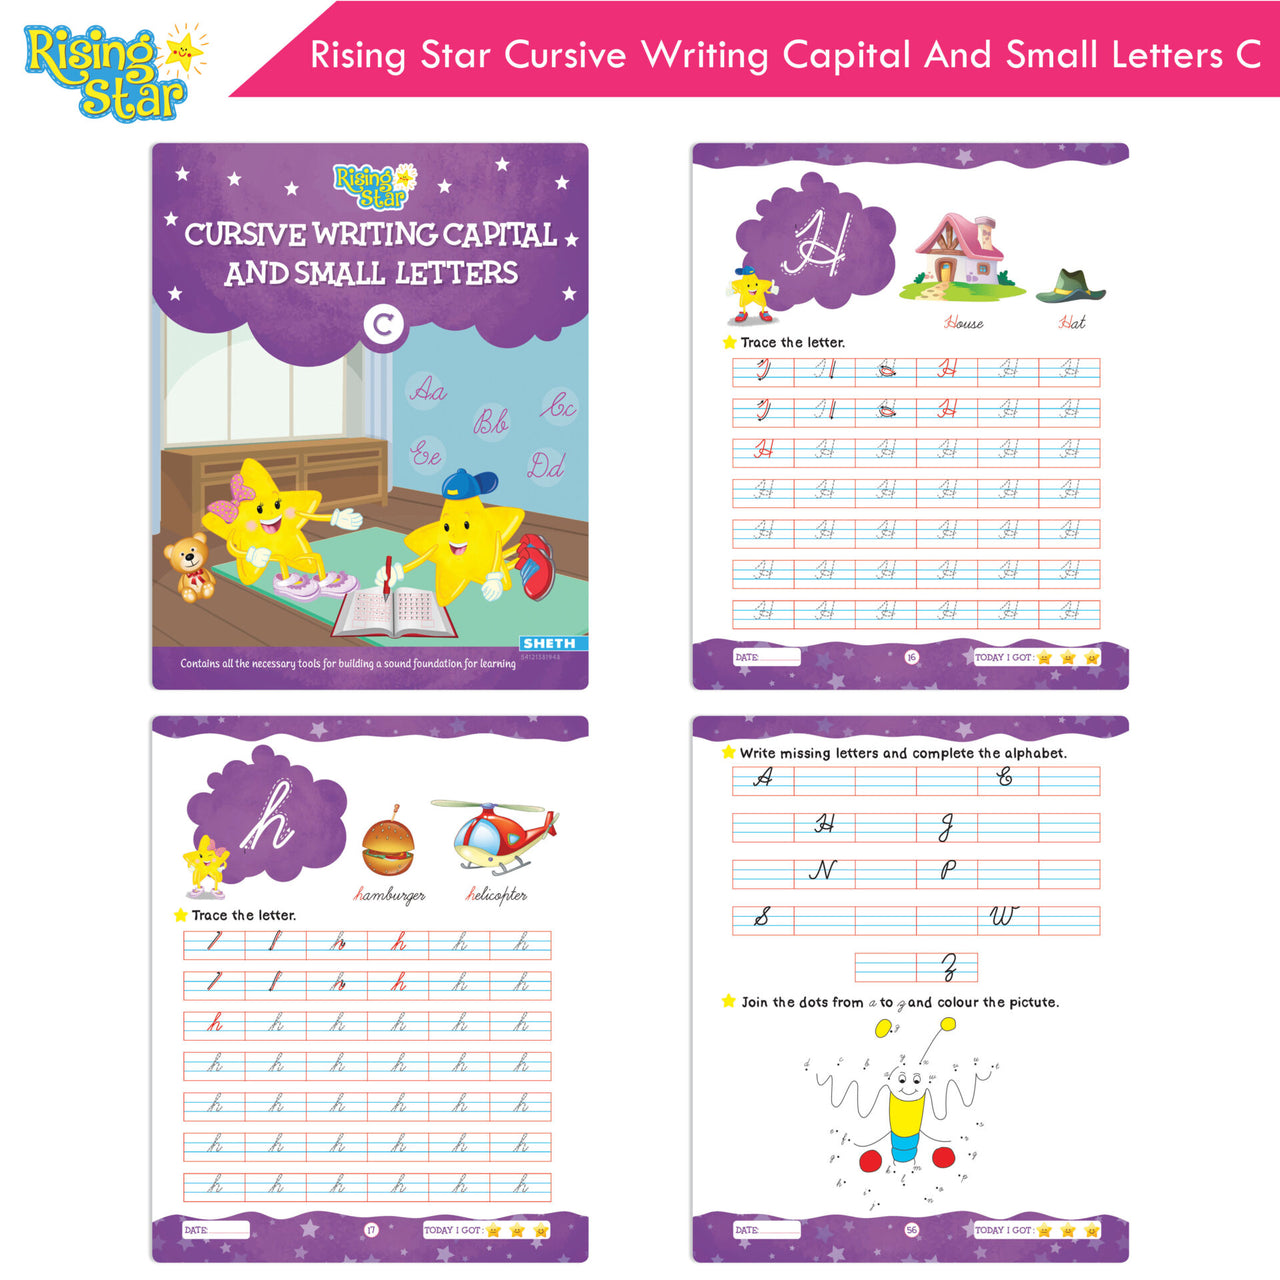 Rising Star Fun Learning Senior KG Books Set of 6| Ages 5-6 Years| Alphabet Letters, Cursive Writing, Number, Colouring, Rhymes & Stories Book - Distacart